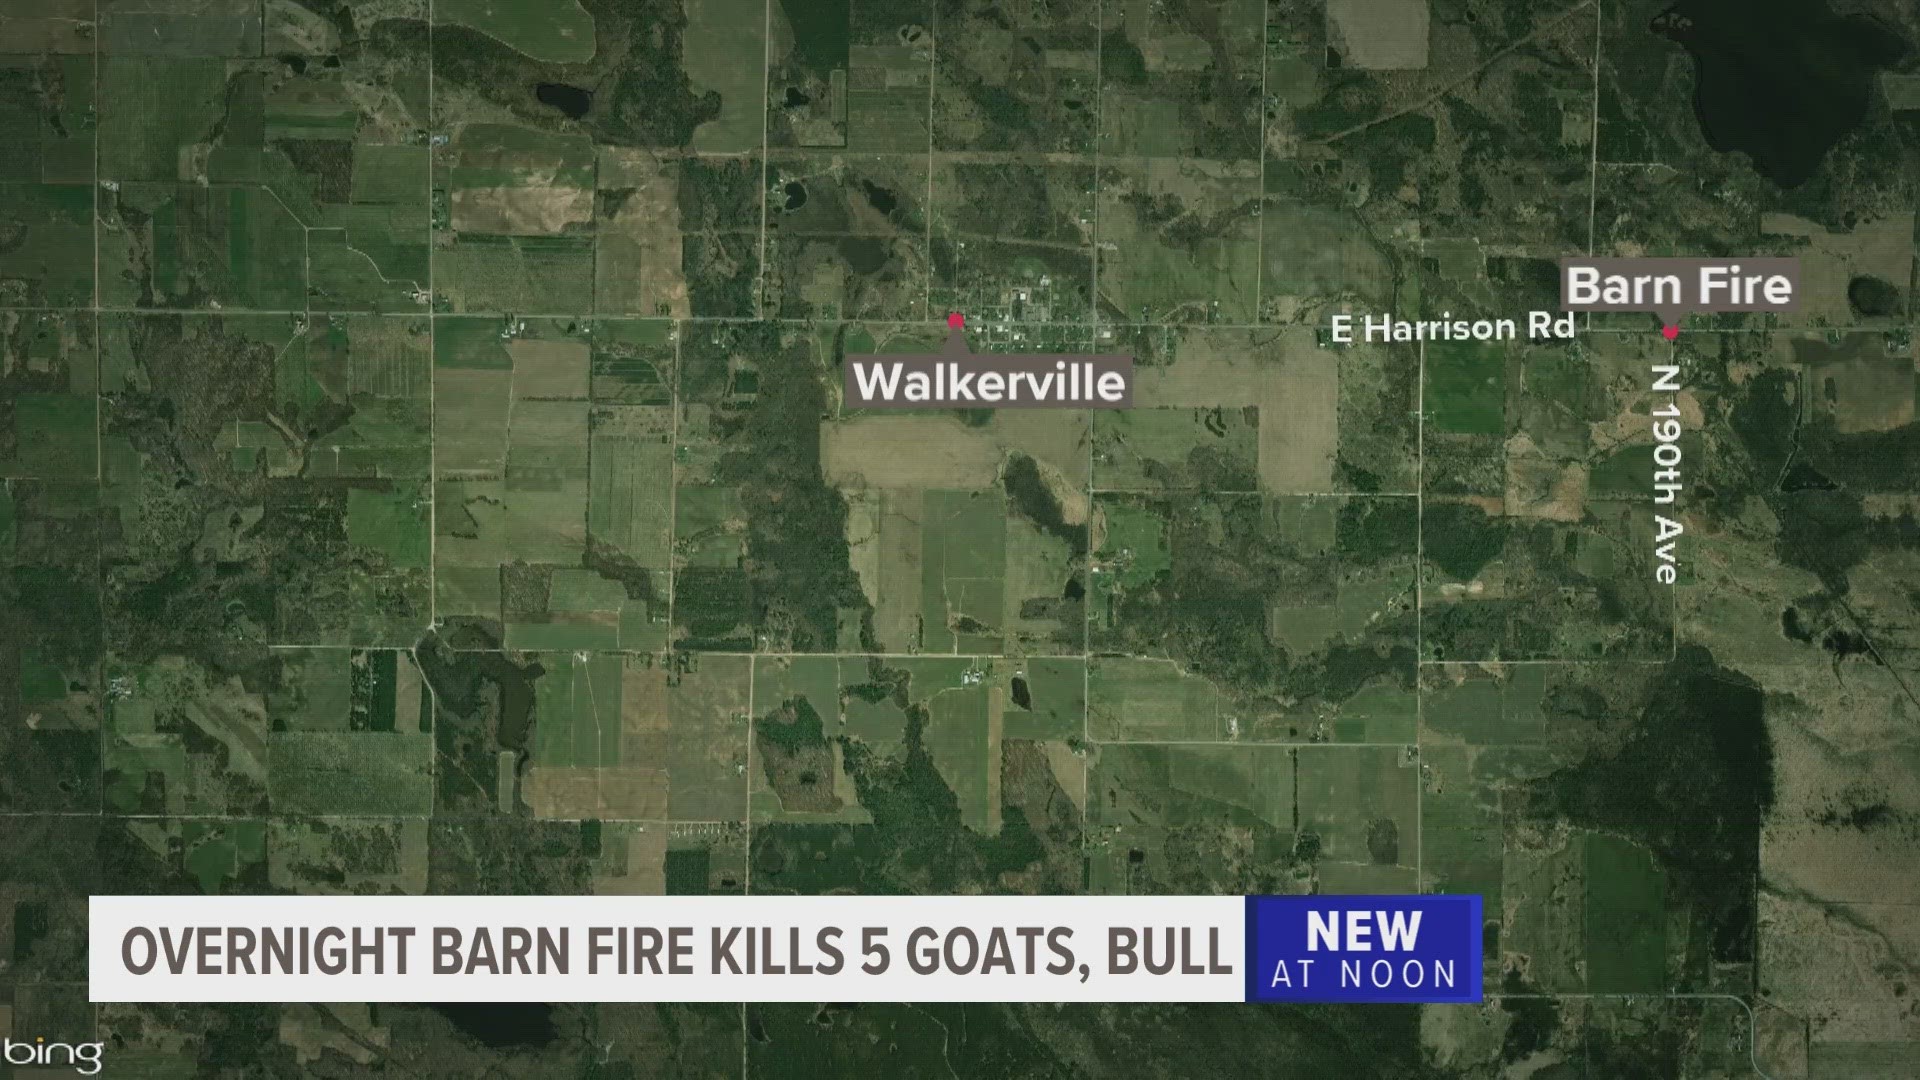 The fire destroyed the barn, authorities say. Five goats and one bull were killed. No injuries have been reported.